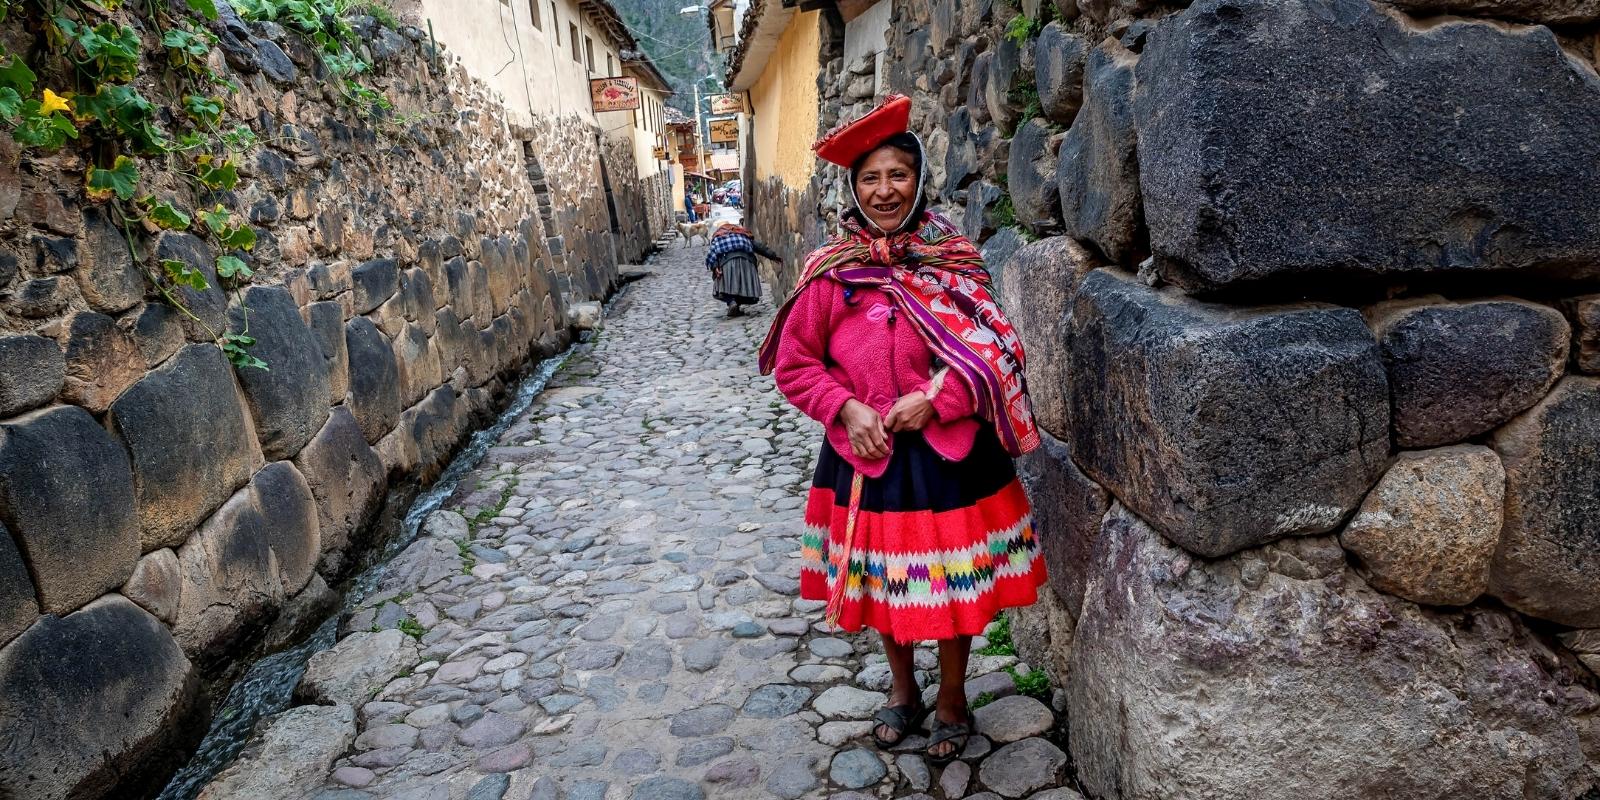 I WILL BE ABLE TO CONTACT WITH THE LOCAL COMMUNITIES ALONG THE LARES TREK